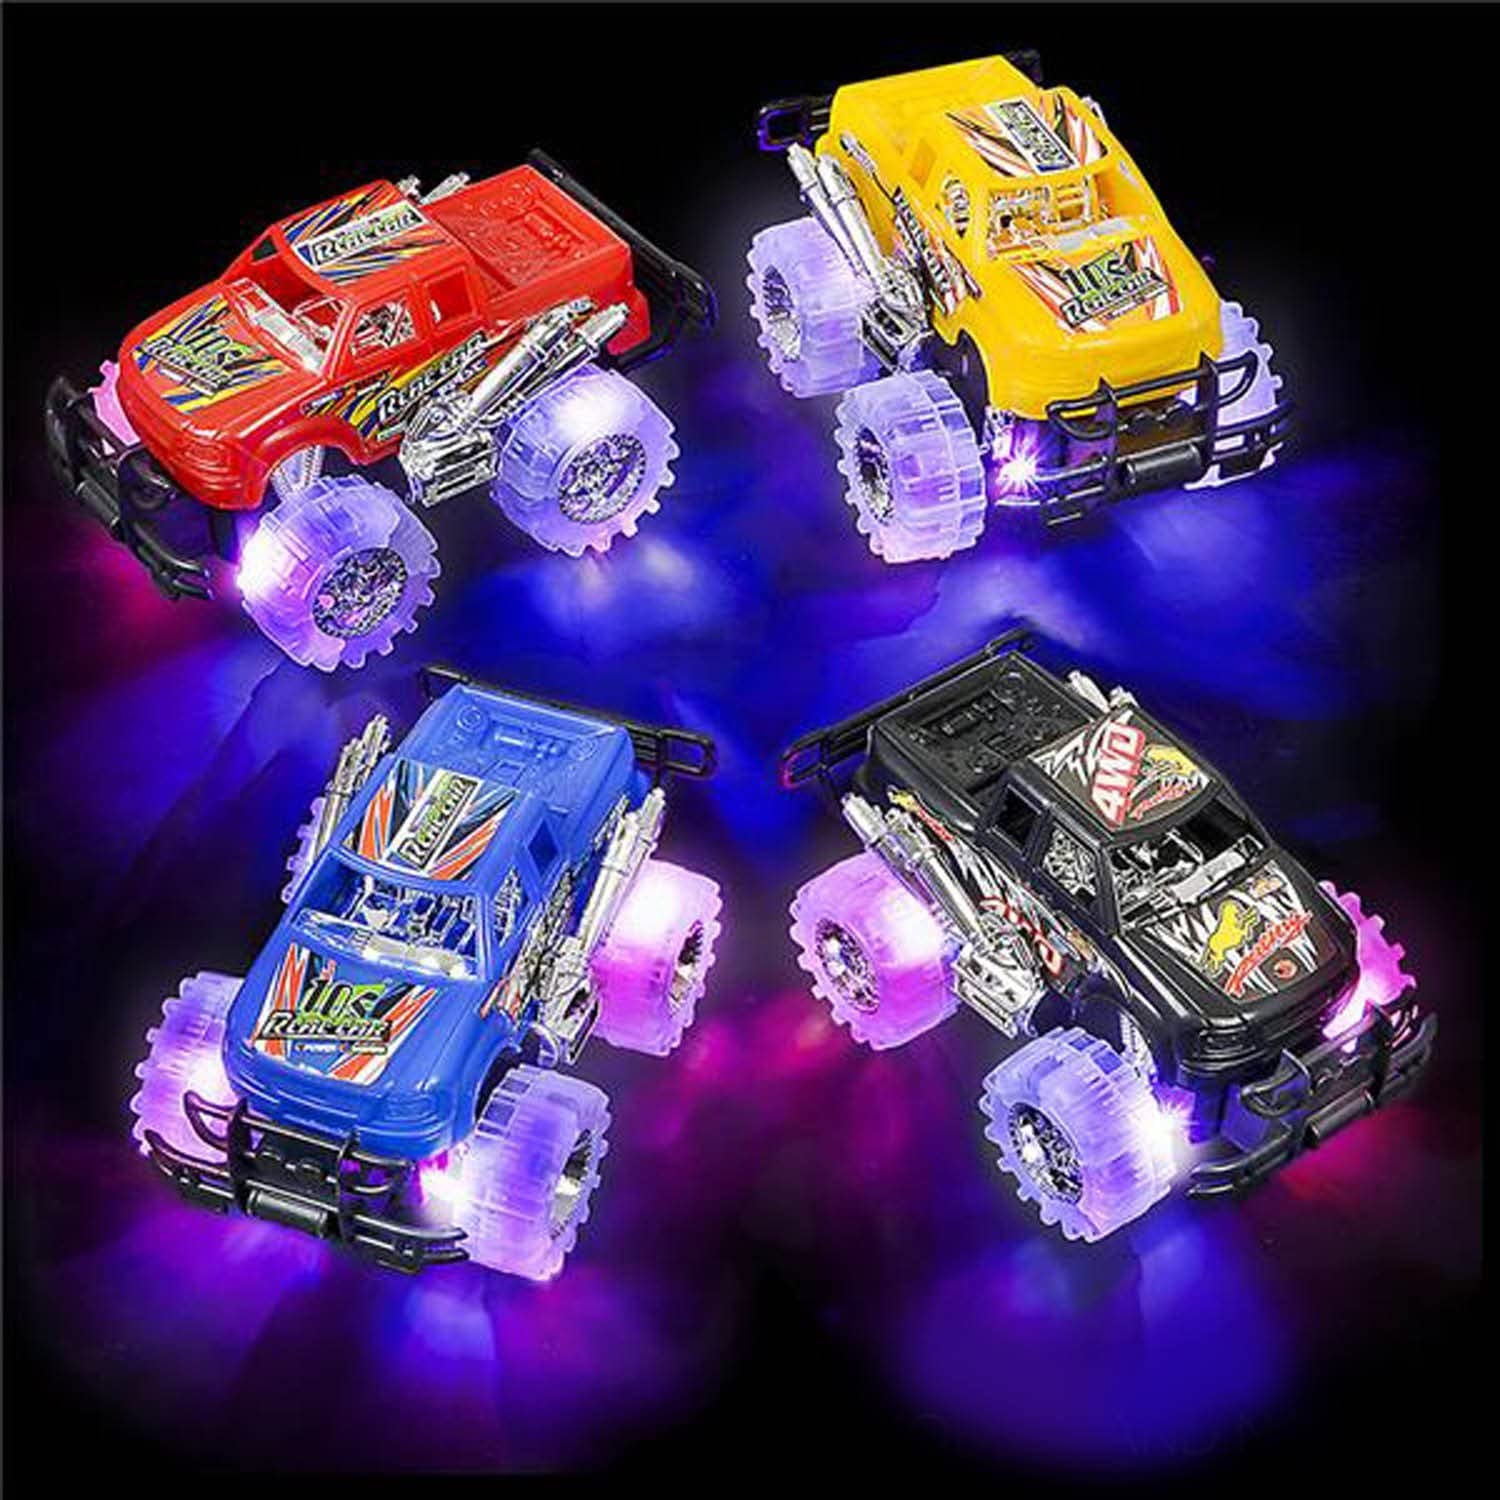 Light up Monster Truck Set for Boys and Girls by Artcreativity - Set Includes 2, 6 Inch Monster Trucks with Beautiful Flashing LED Tires - Push N Go Toy Cars Fun Gift for Kids - for Ages 3+